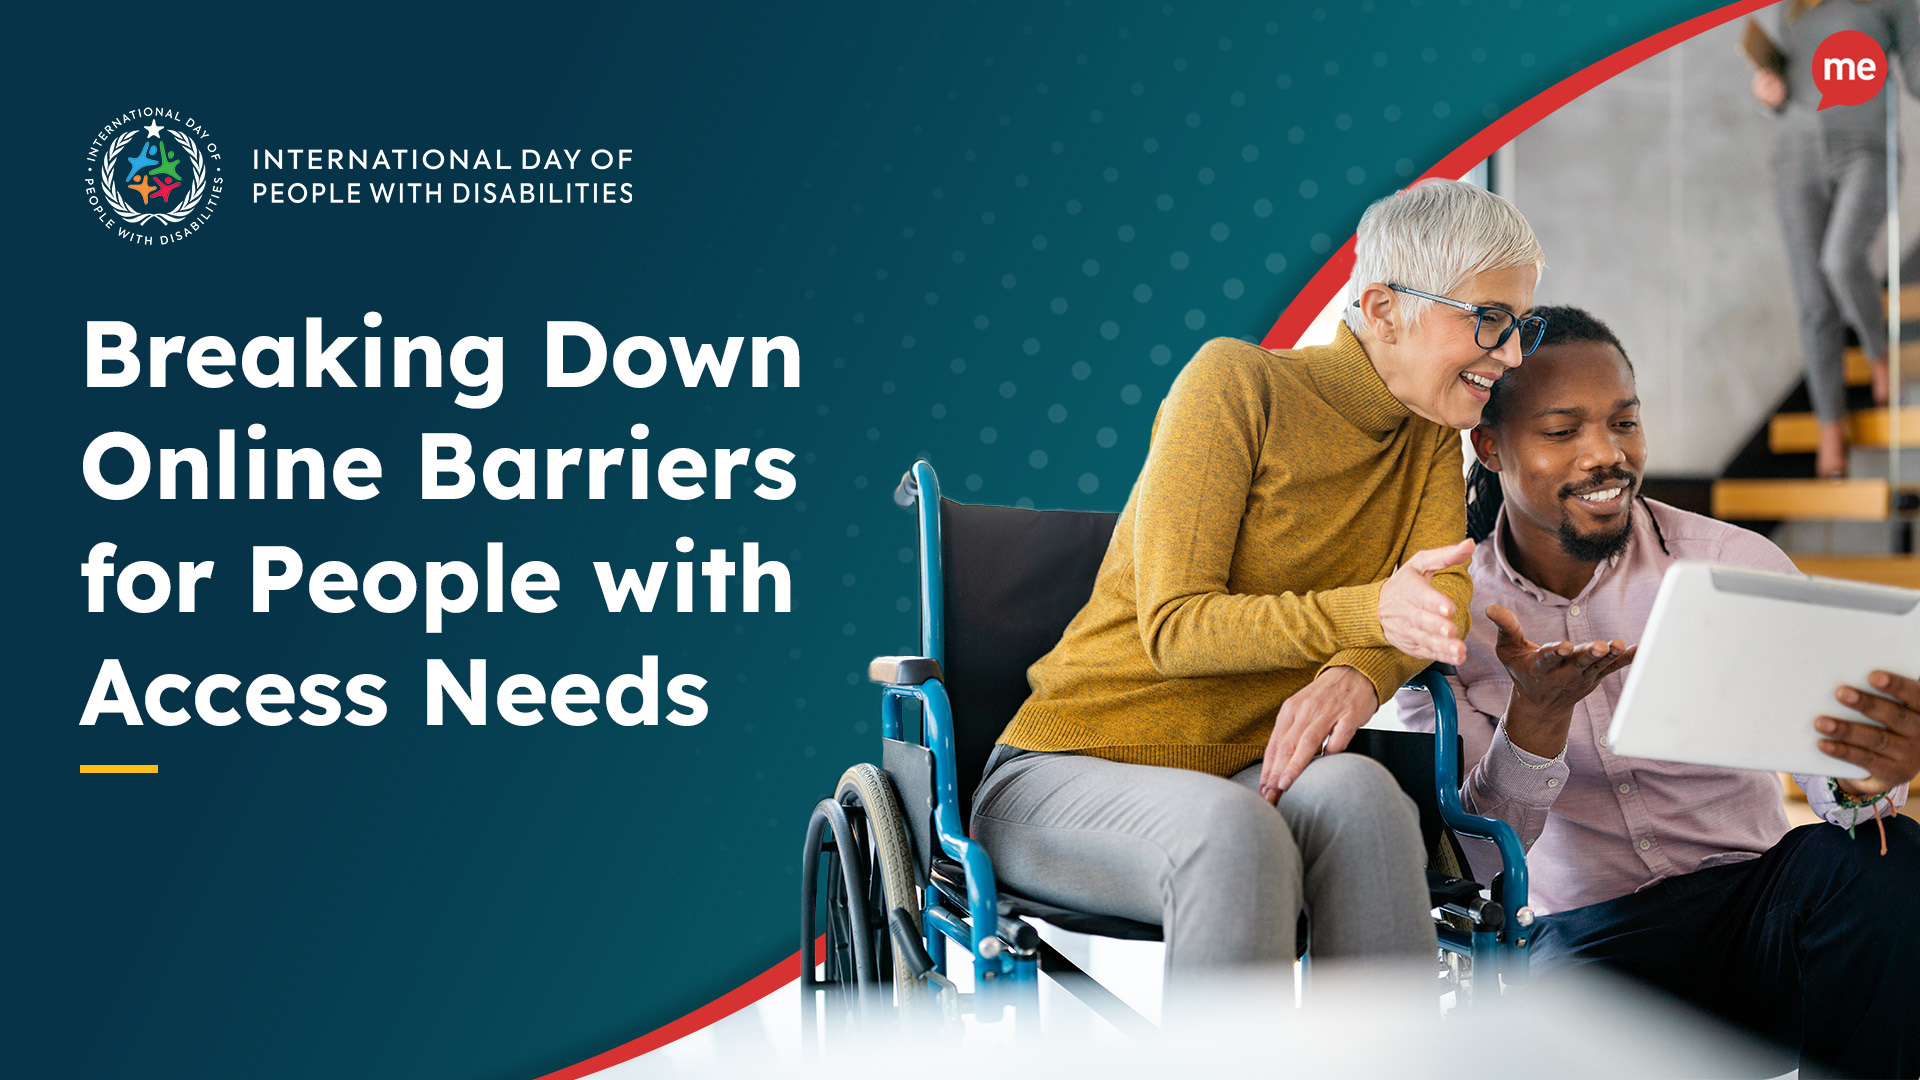 Breaking Down Online Barriers for People with Access Needs